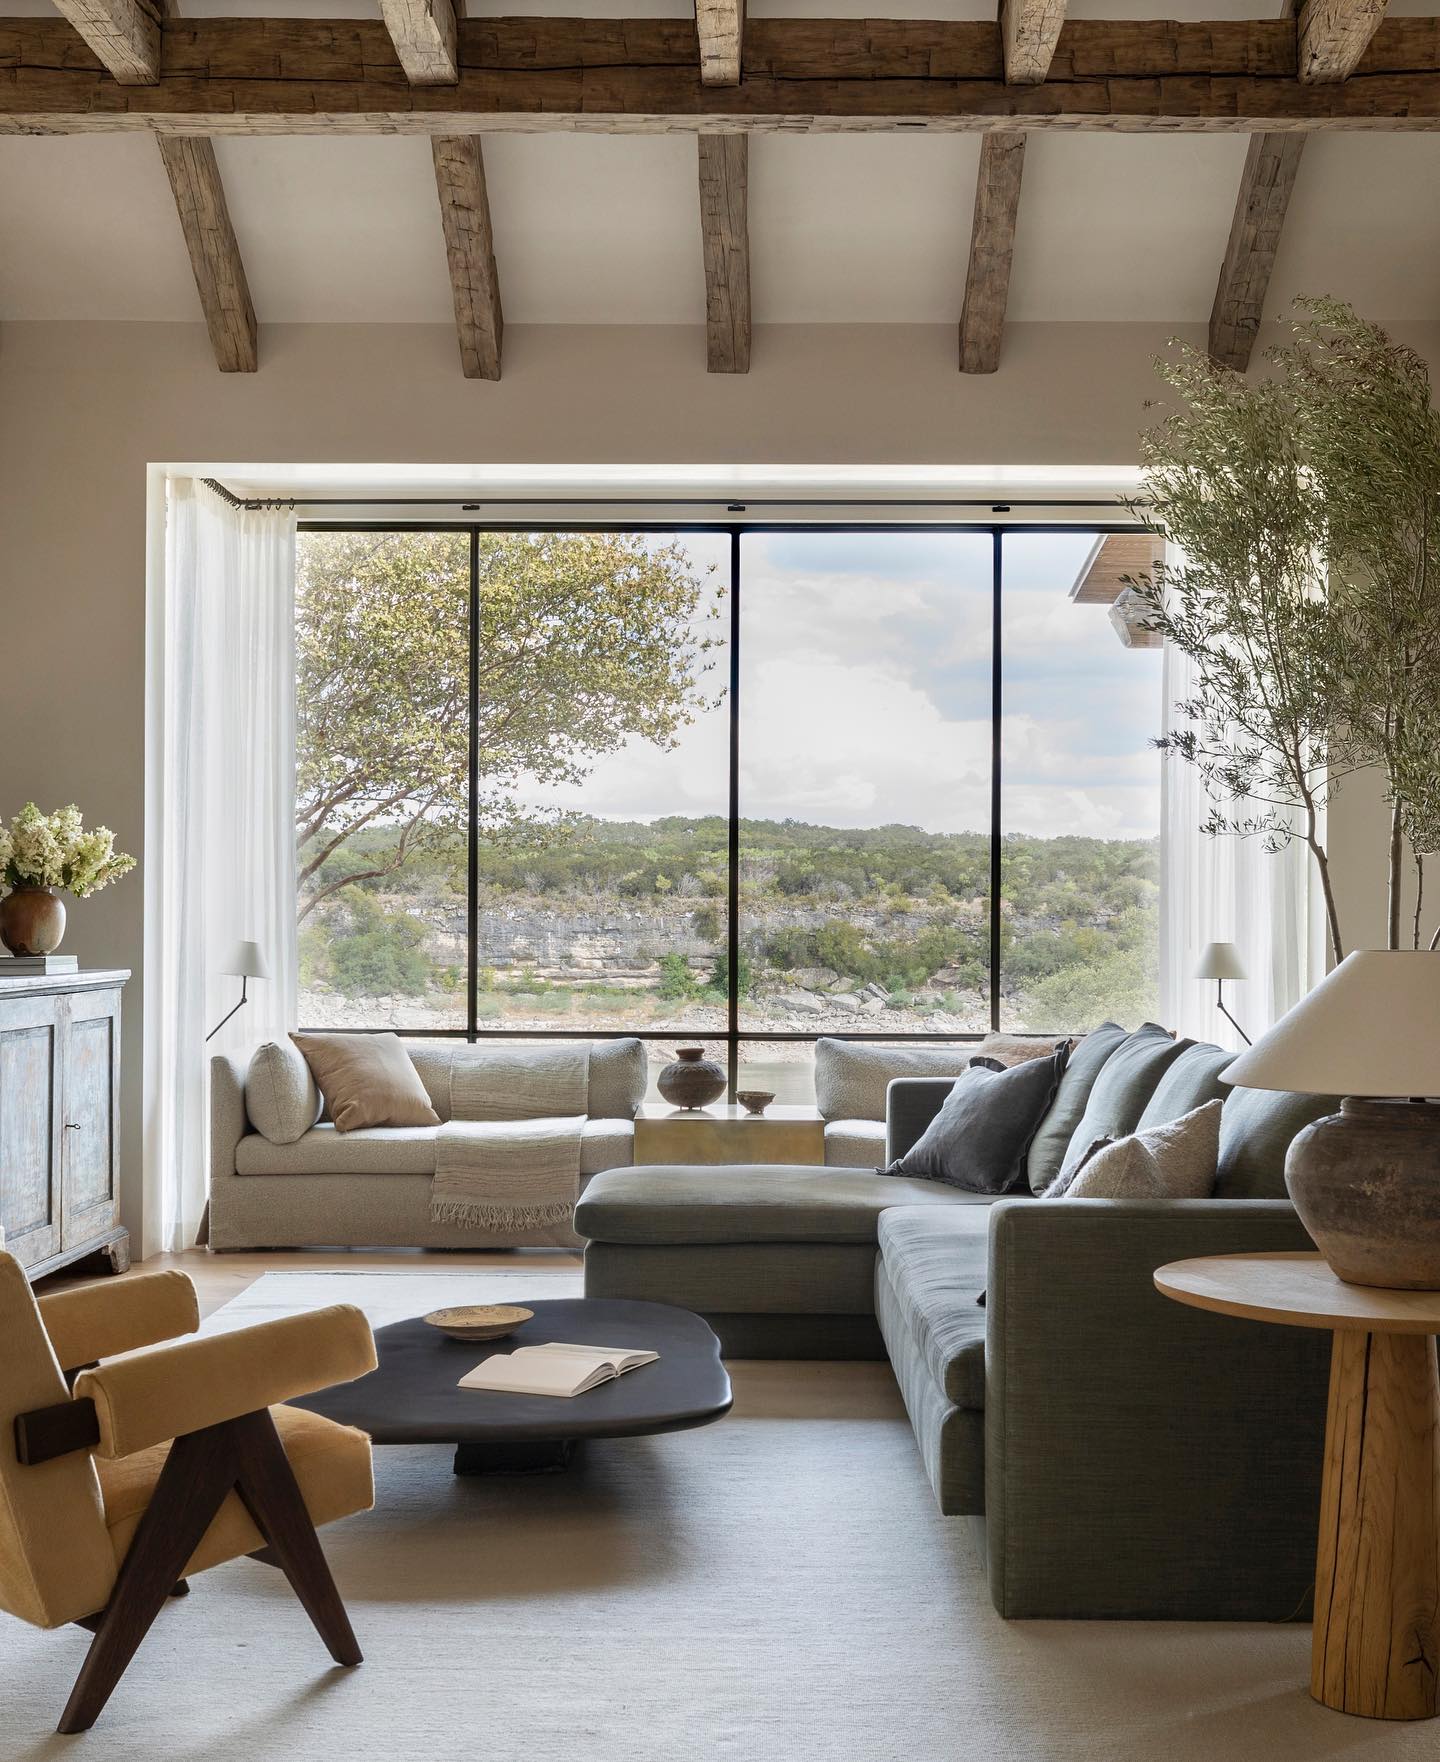 Beautifully earthy and luxurious living space by Marie Flanigan Interiors.